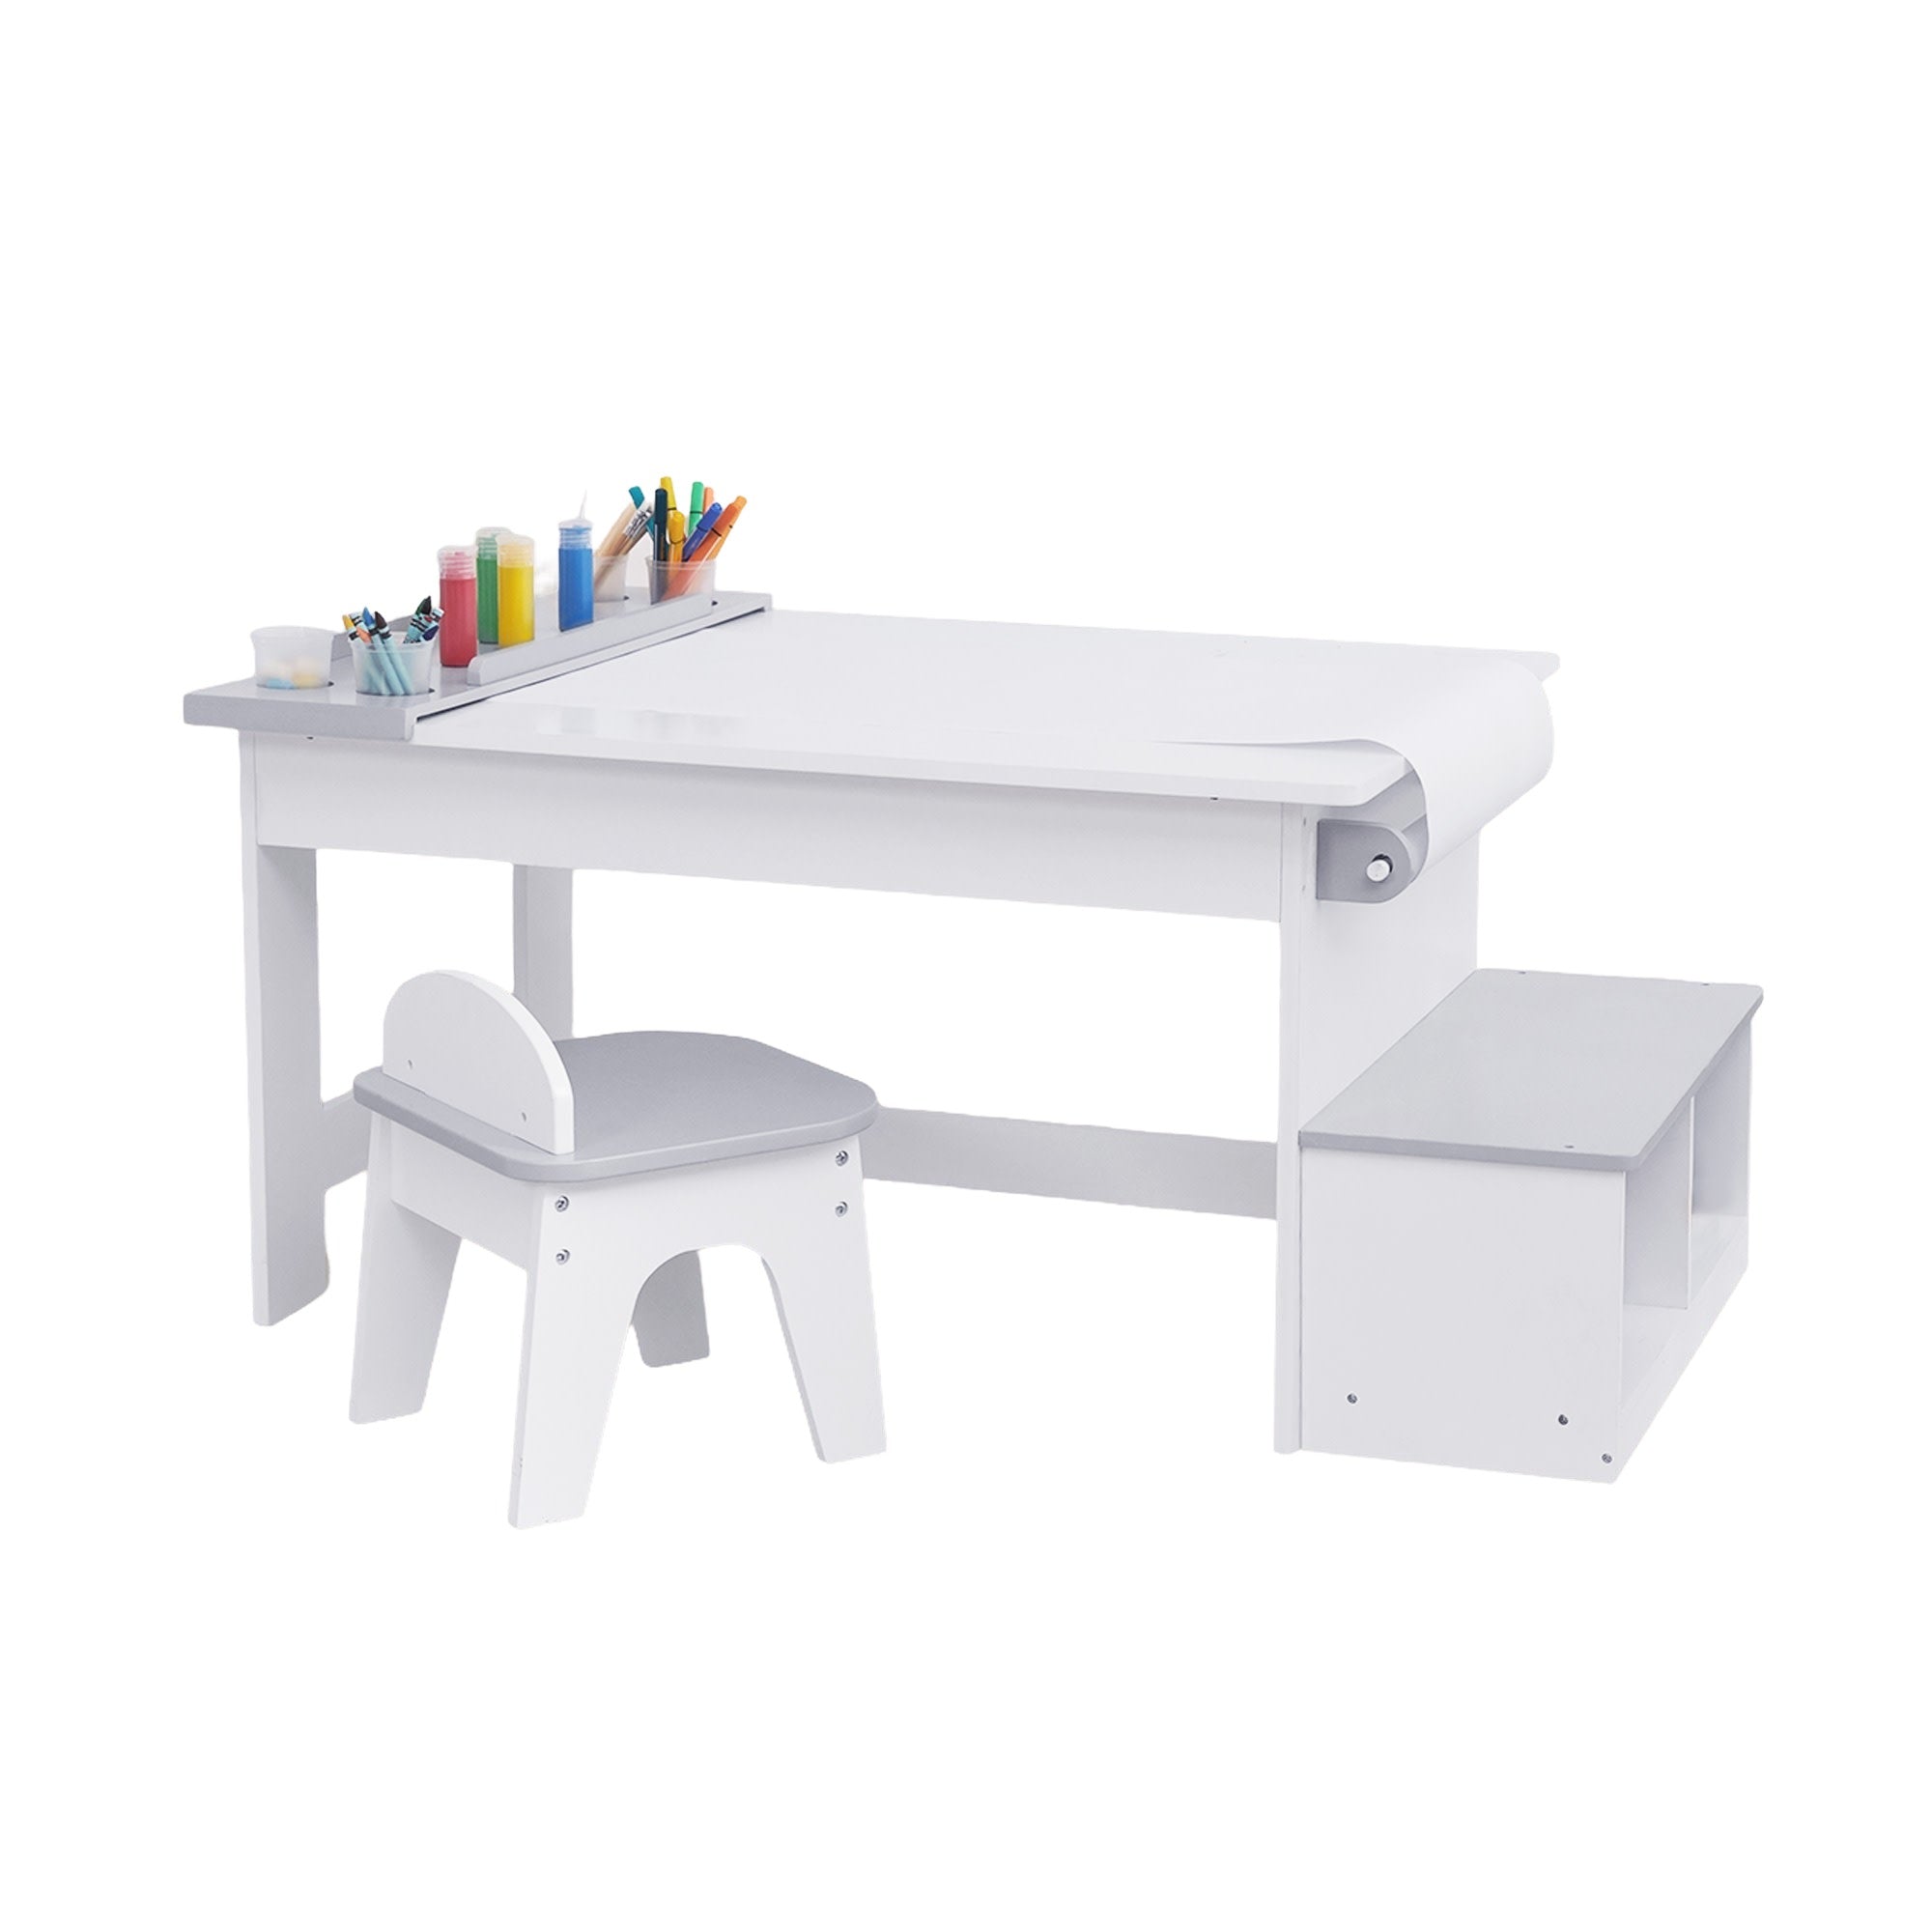 Fantasy Fields Little Monet Art Table With Paper Roll, Stool, Bench And More, White/gray